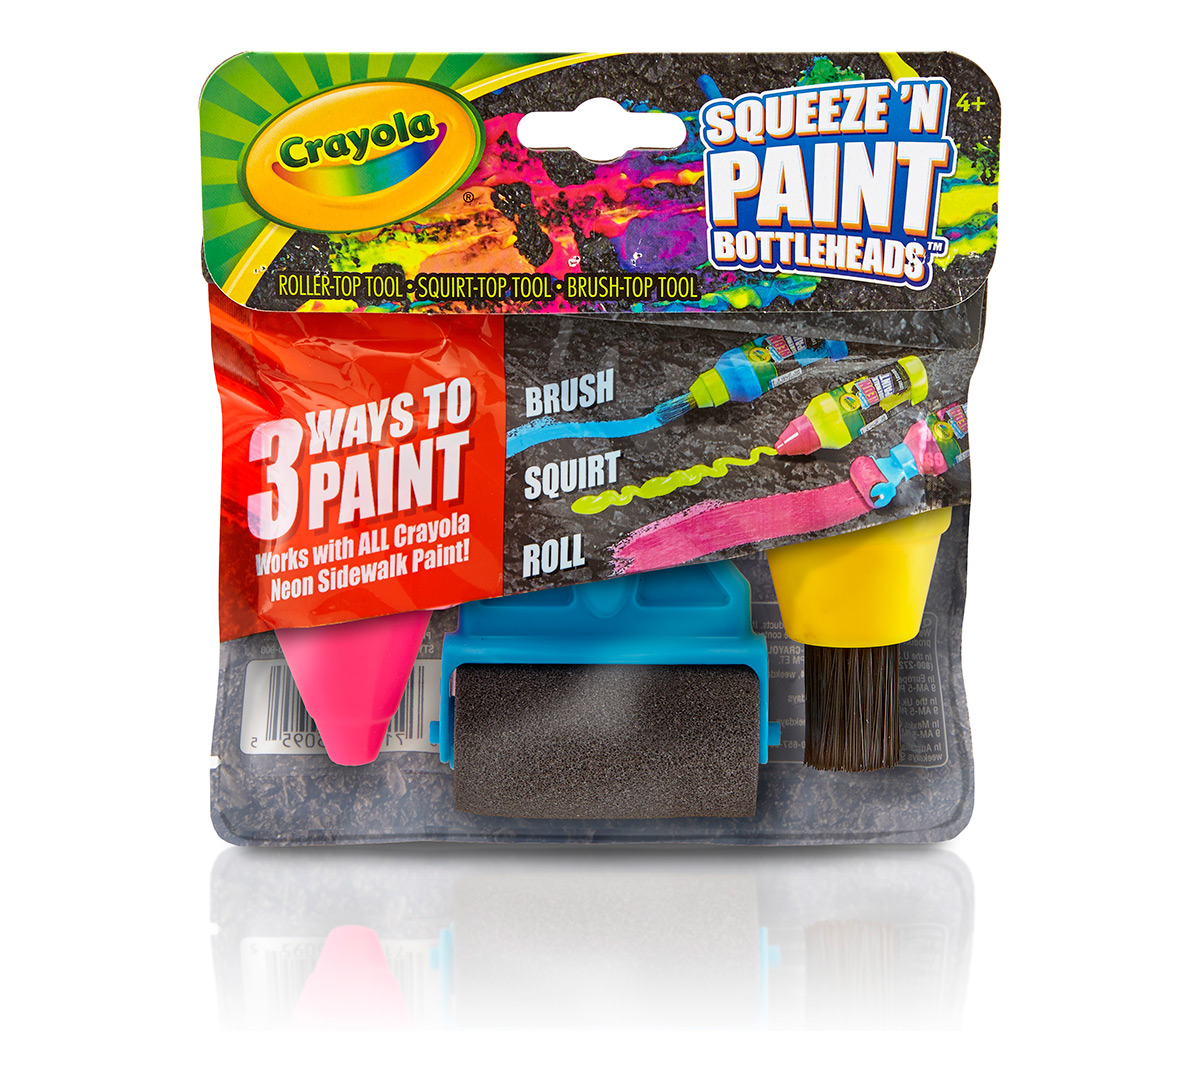 Download Squeeze N Paint Bottleheads | Crayola